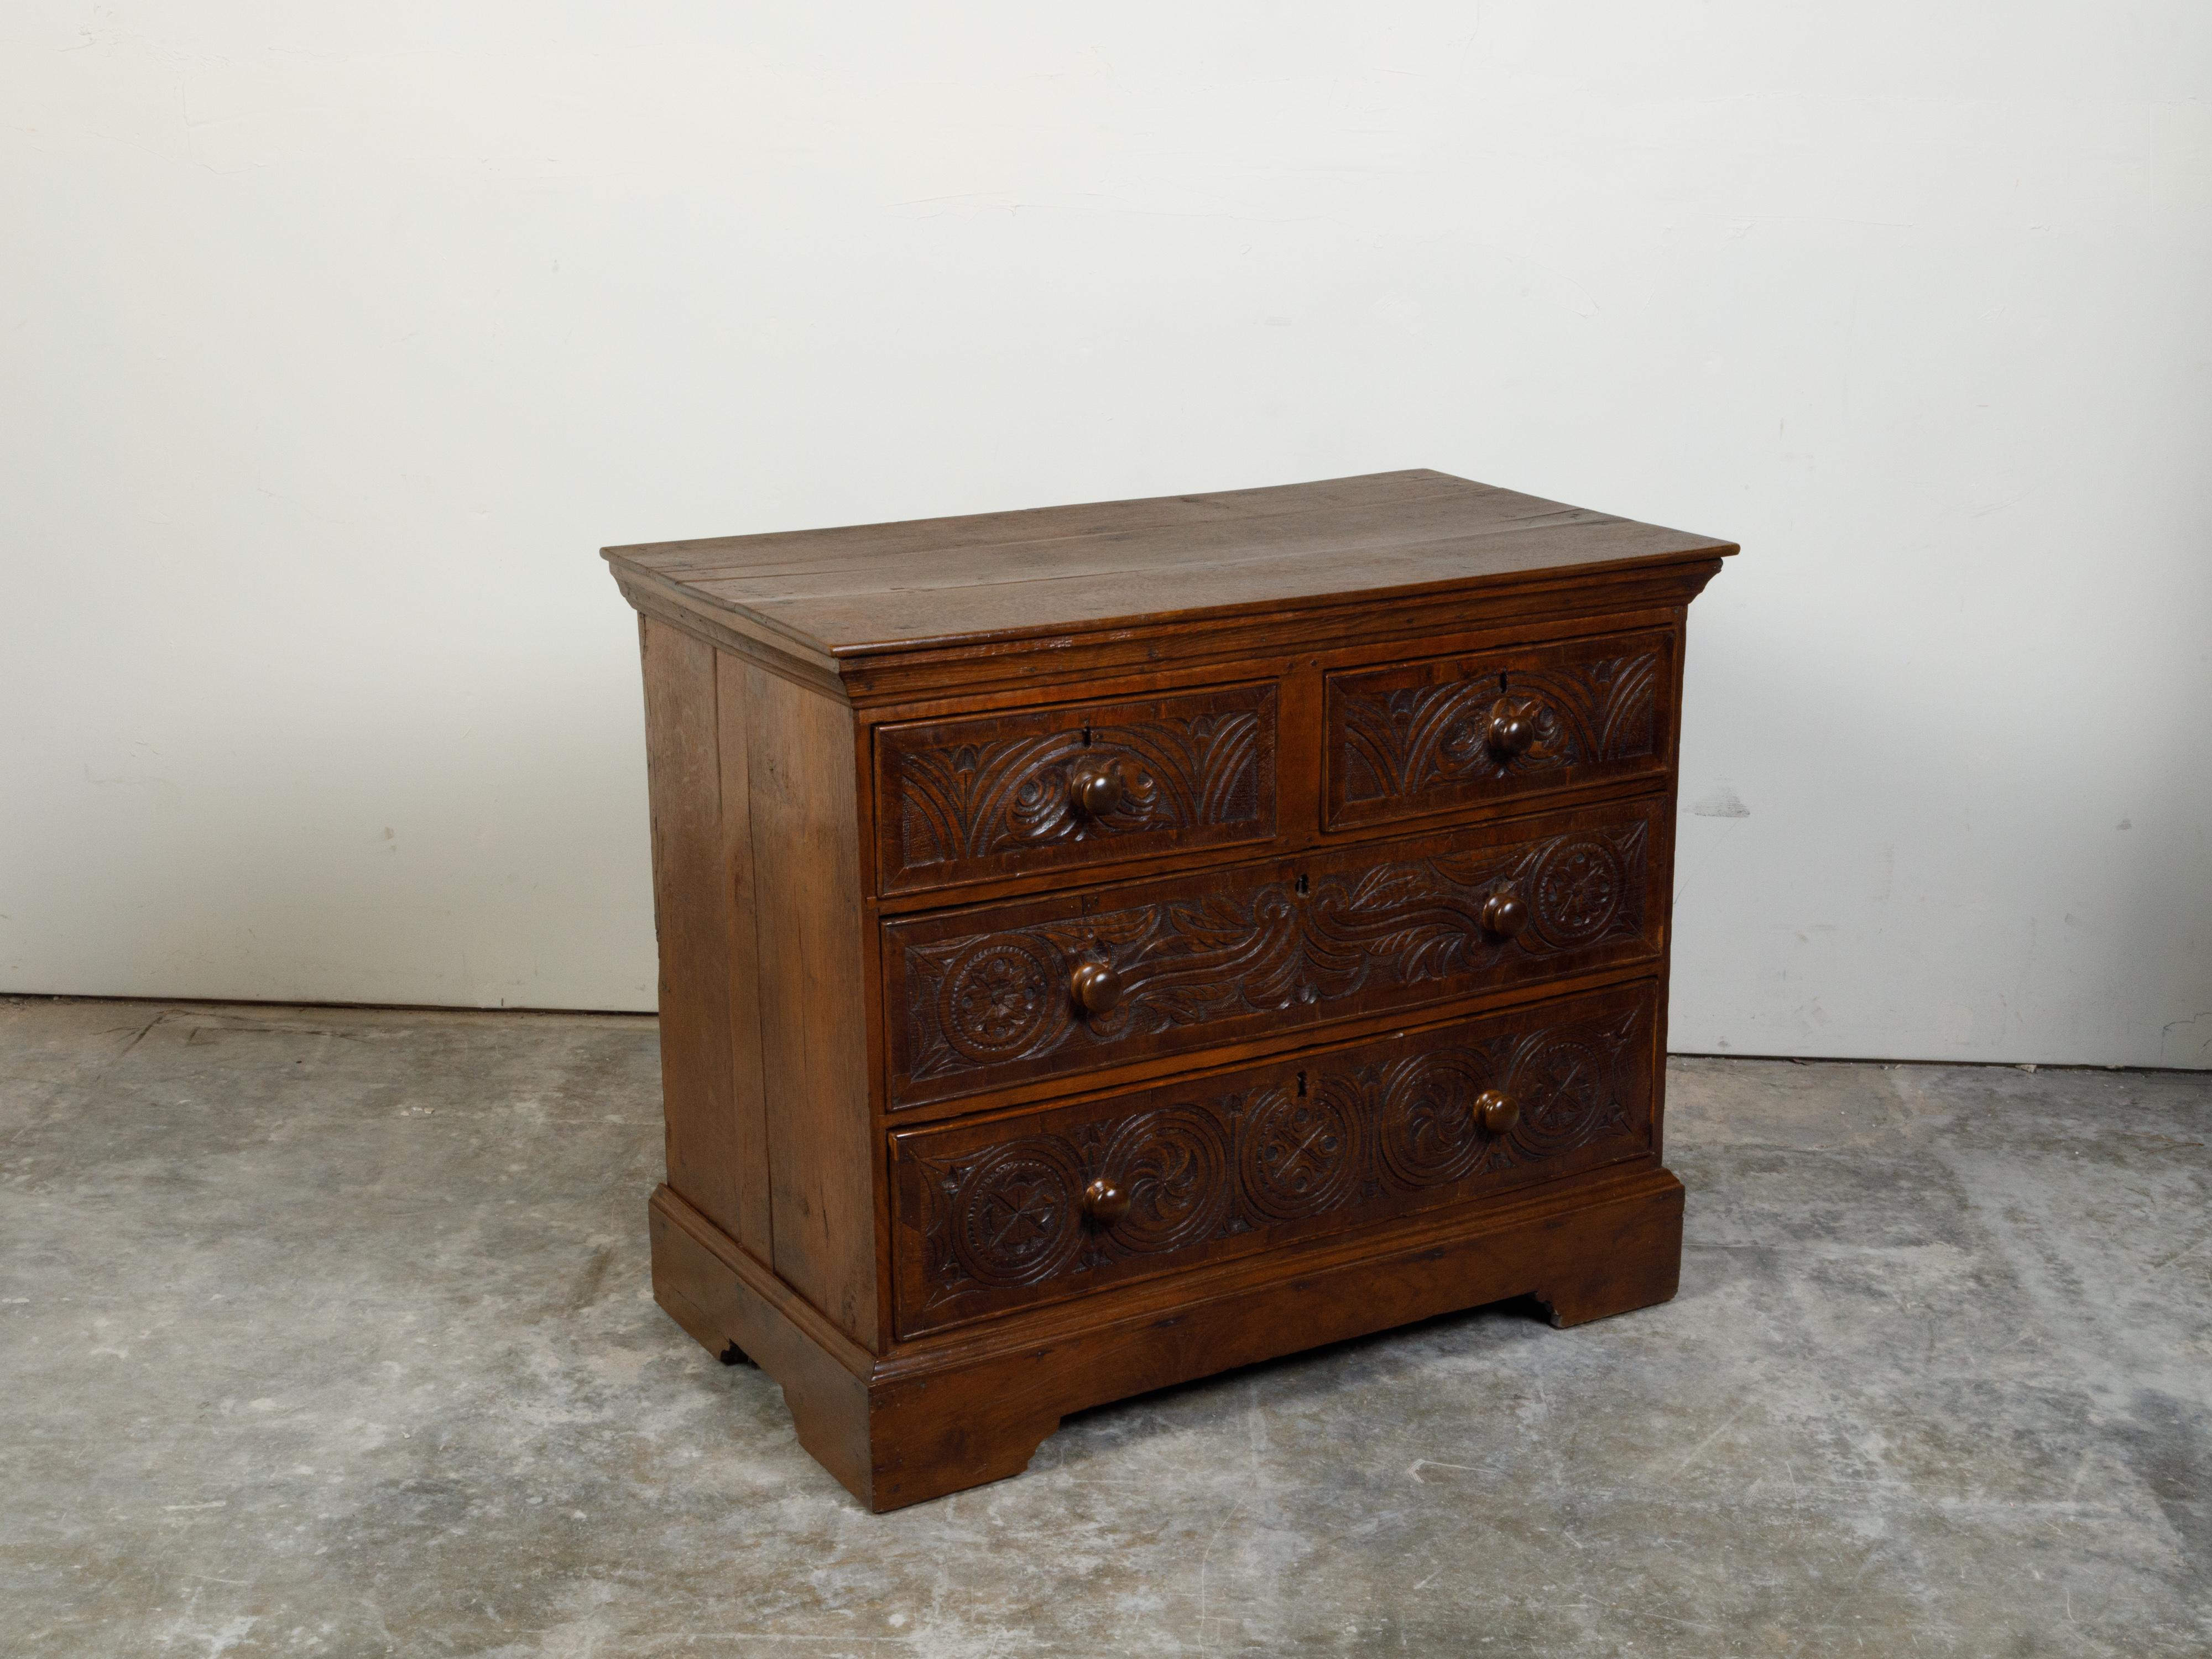 English Georgian Period 1800s Oak Chest with Four Drawers and Carved Motifs In Good Condition For Sale In Atlanta, GA